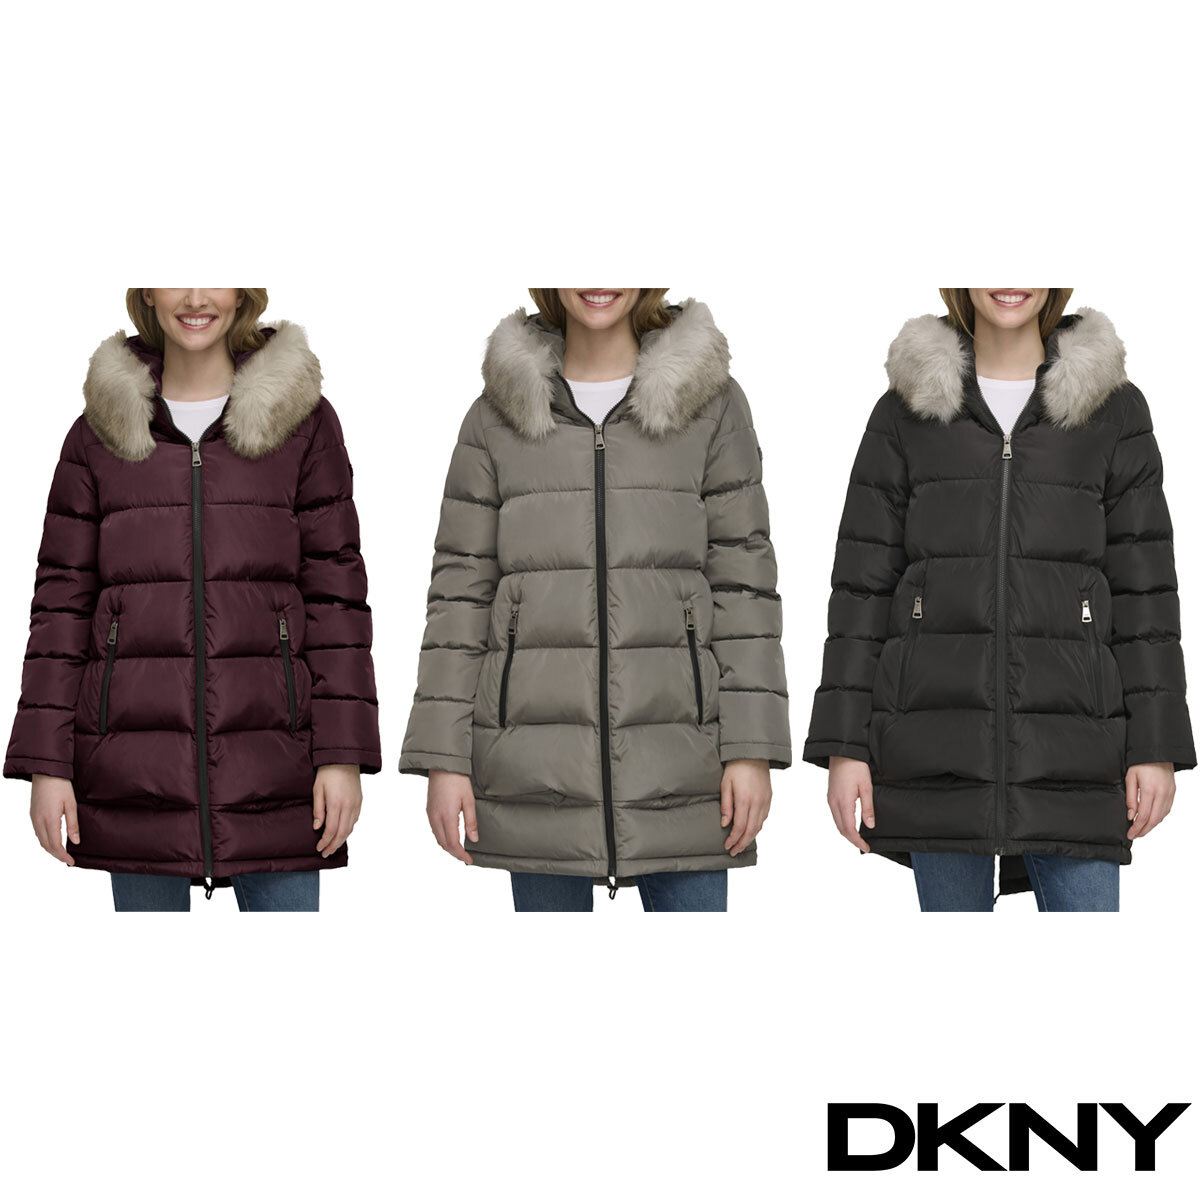 DKNY Ladies Long Coat in 3 Colours and 4 Sizes | Costco UK